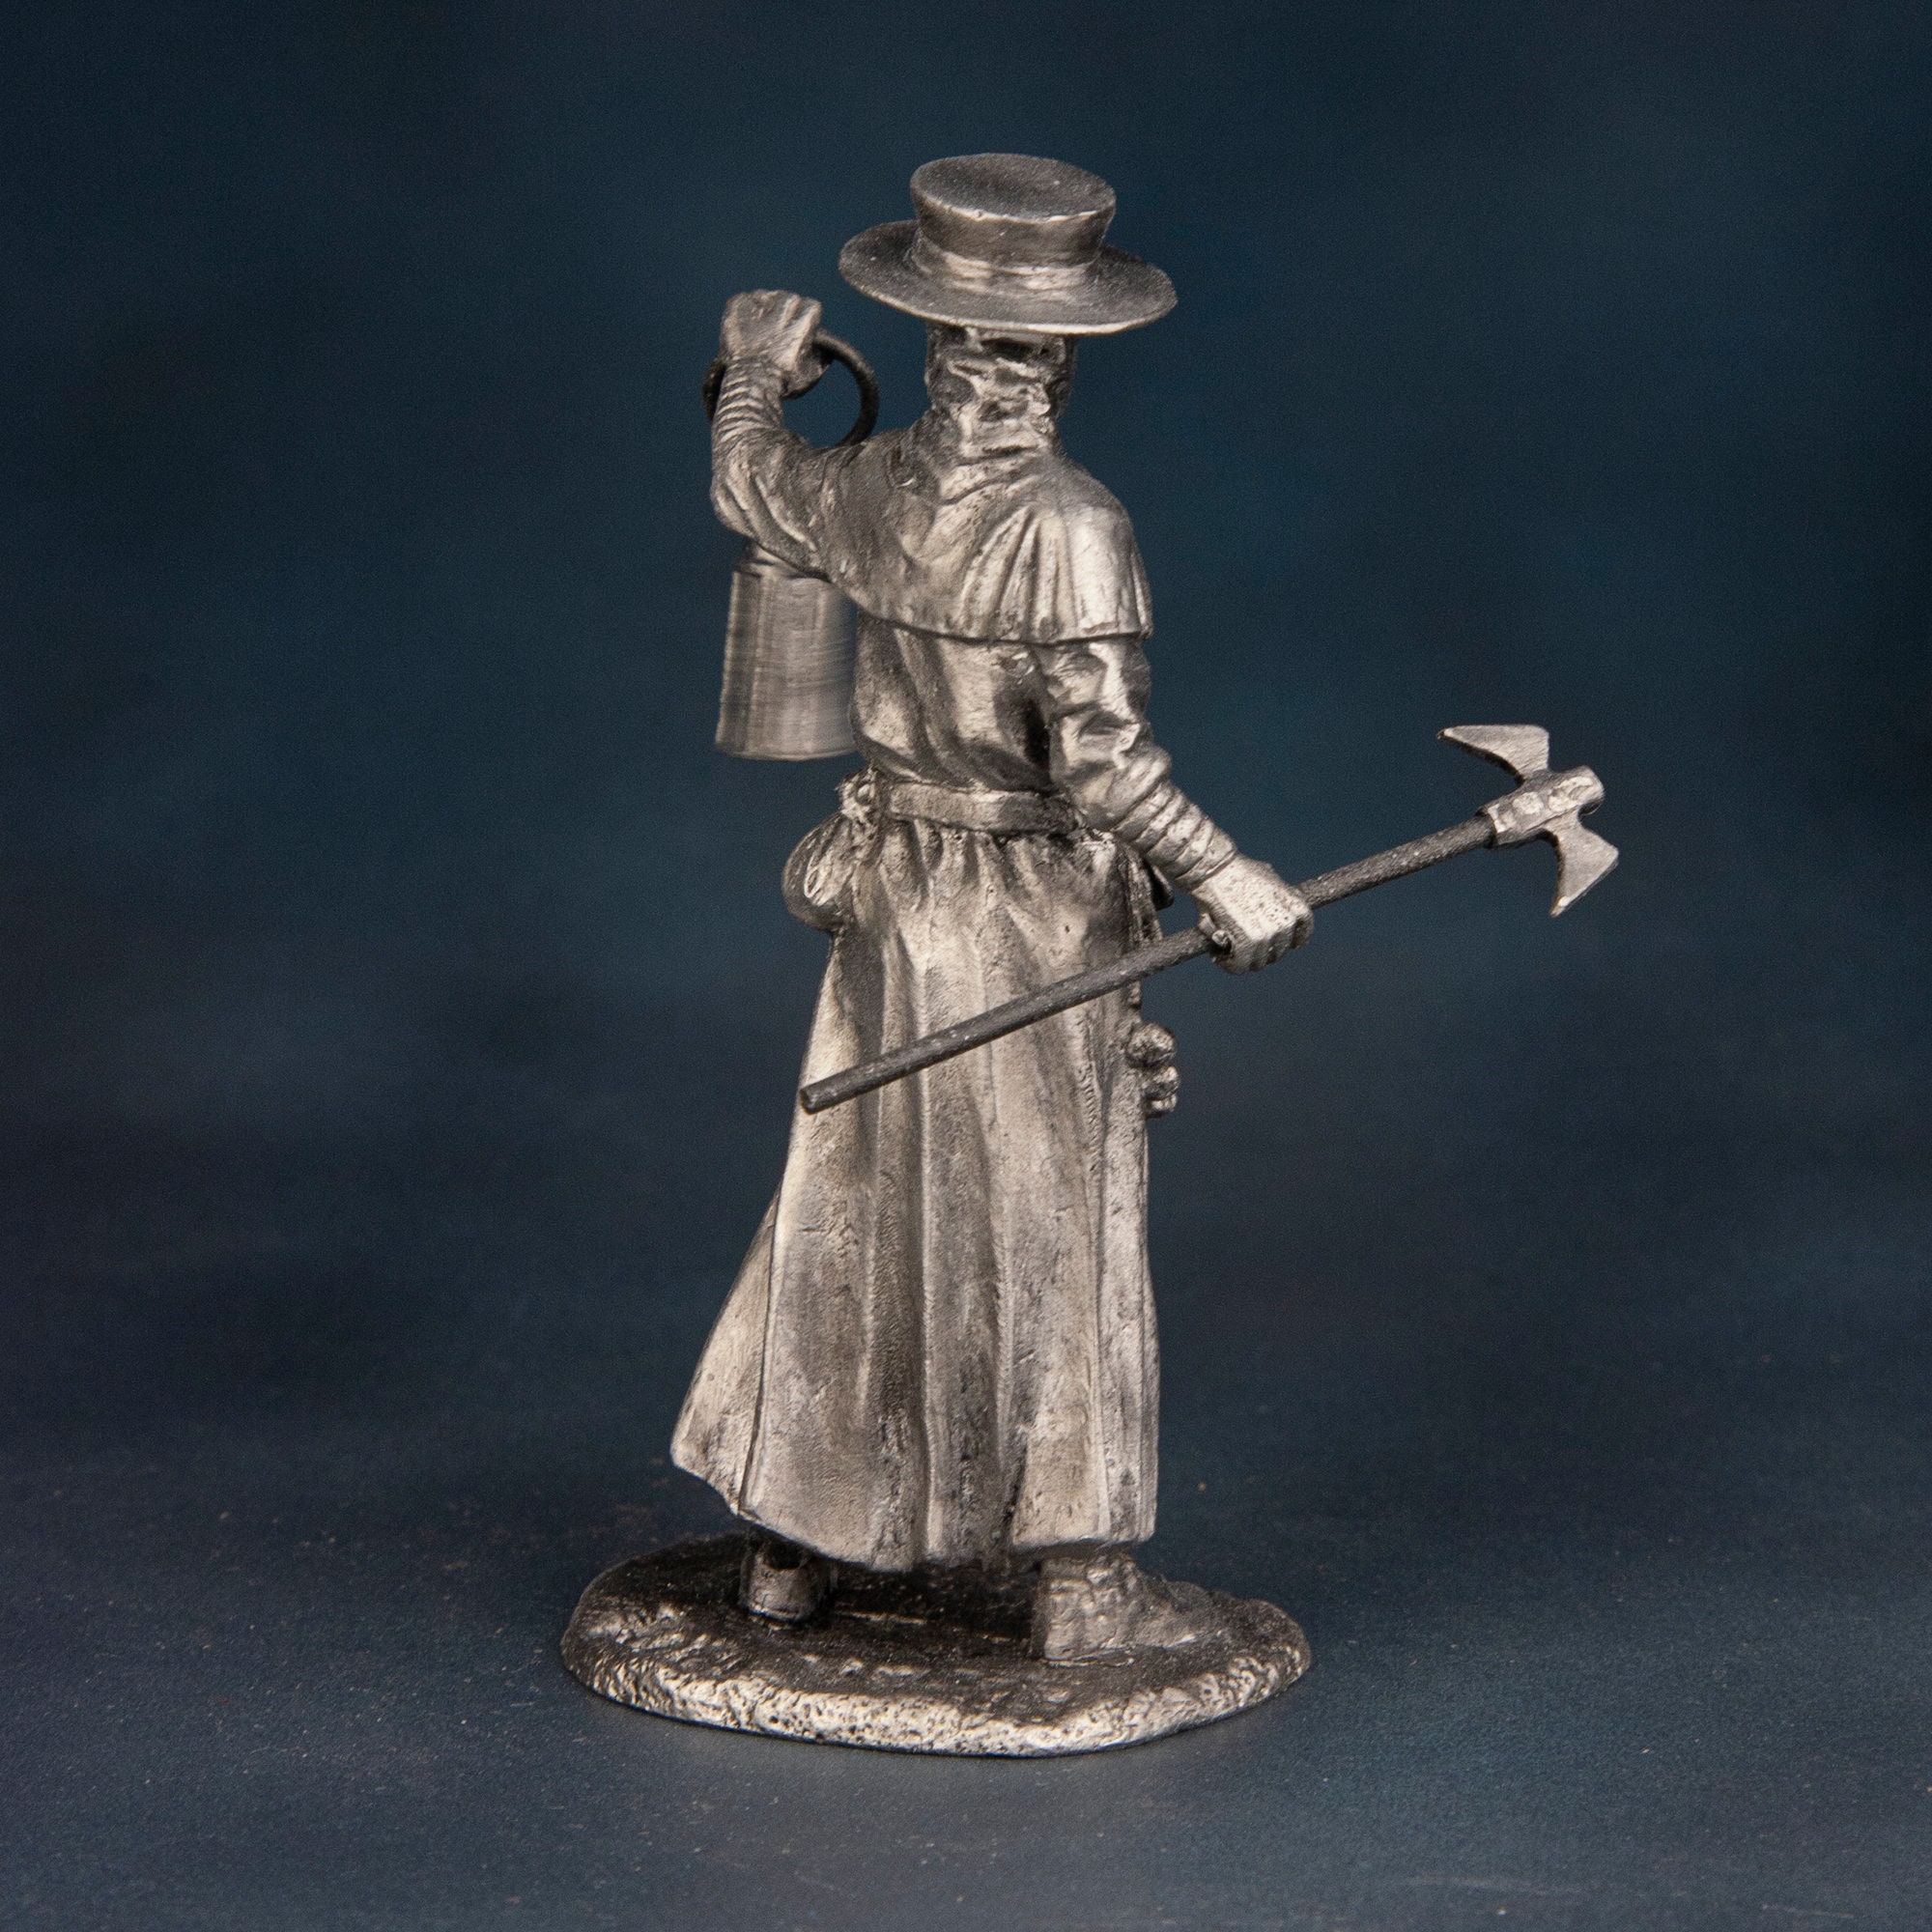 Plague Doctor Middle Ages Model 54mm collectible statue Copper figur Mw-15 